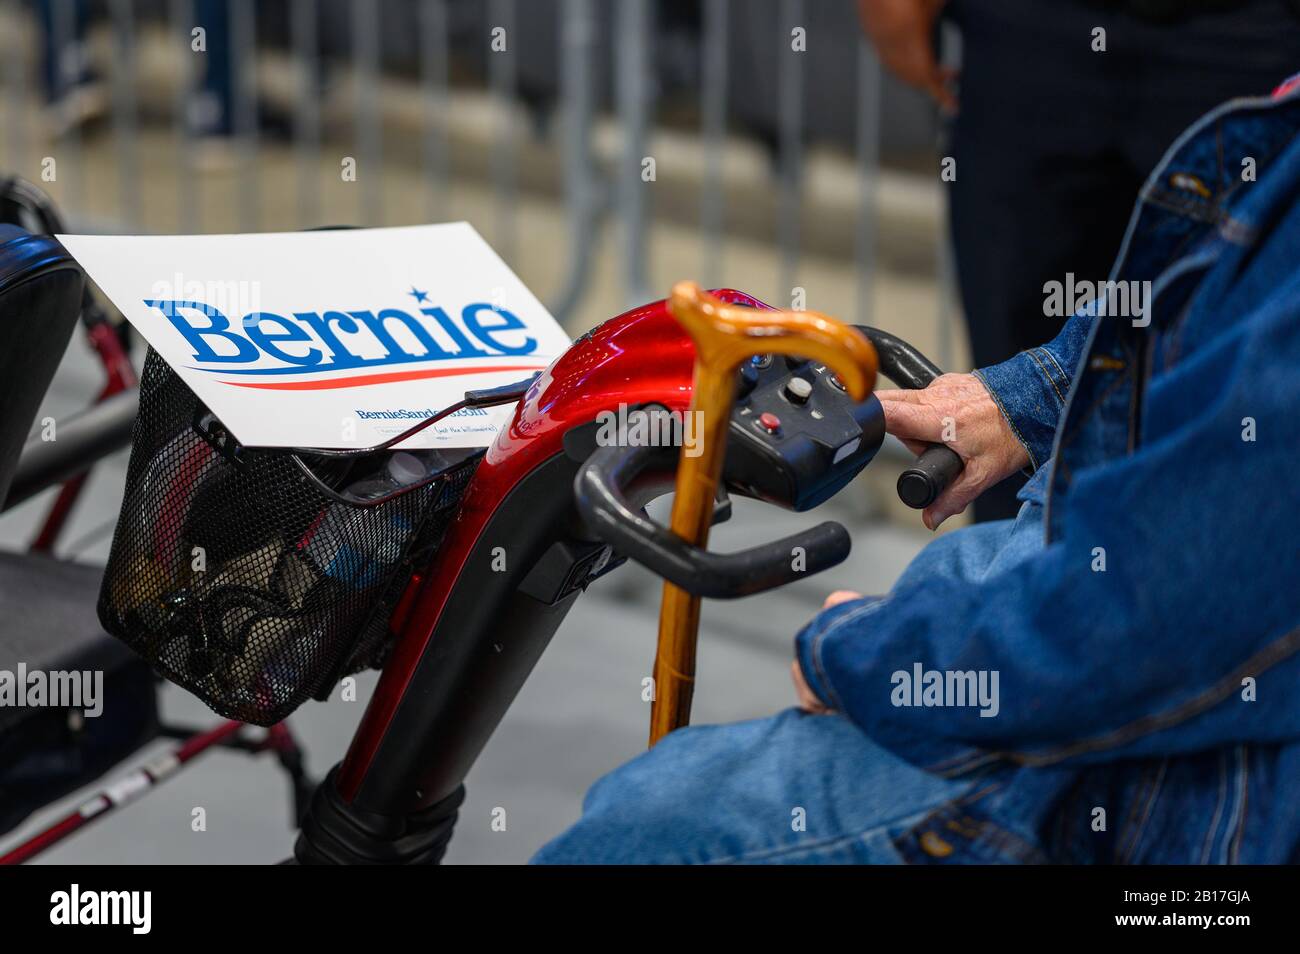 Houston, Texas - February 23, 2020: Old man on mobility scooter listens as Democratic Presidential candidate Senator Bernie Sanders speaks to the crow Stock Photo